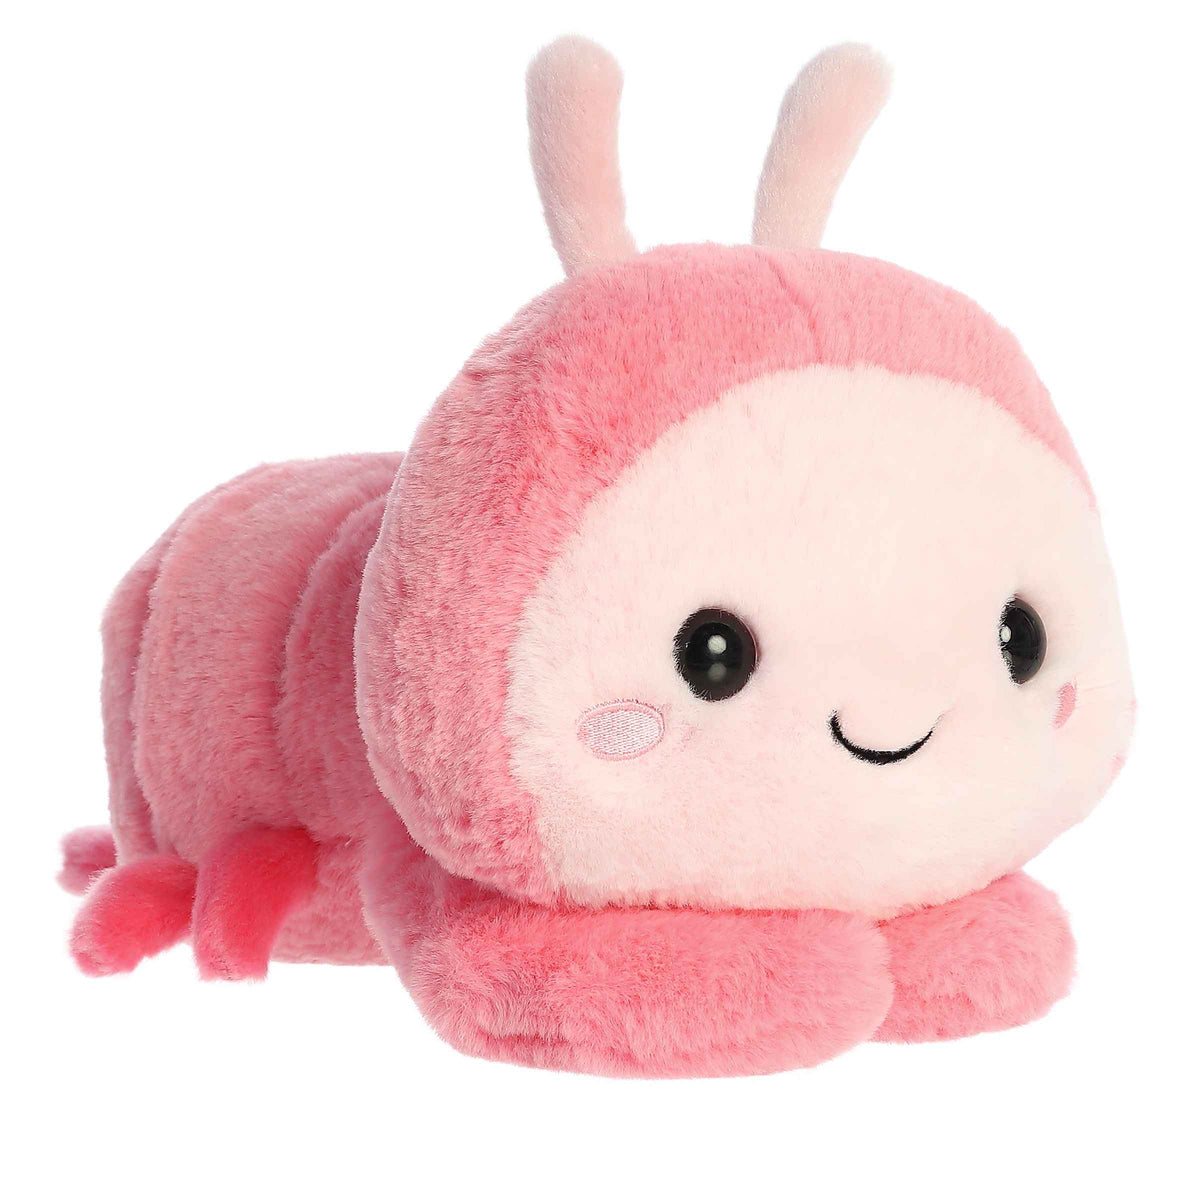 Shimmi Shrimp plush from Too Cute Collection, pink and squishy, designed for the best hugs